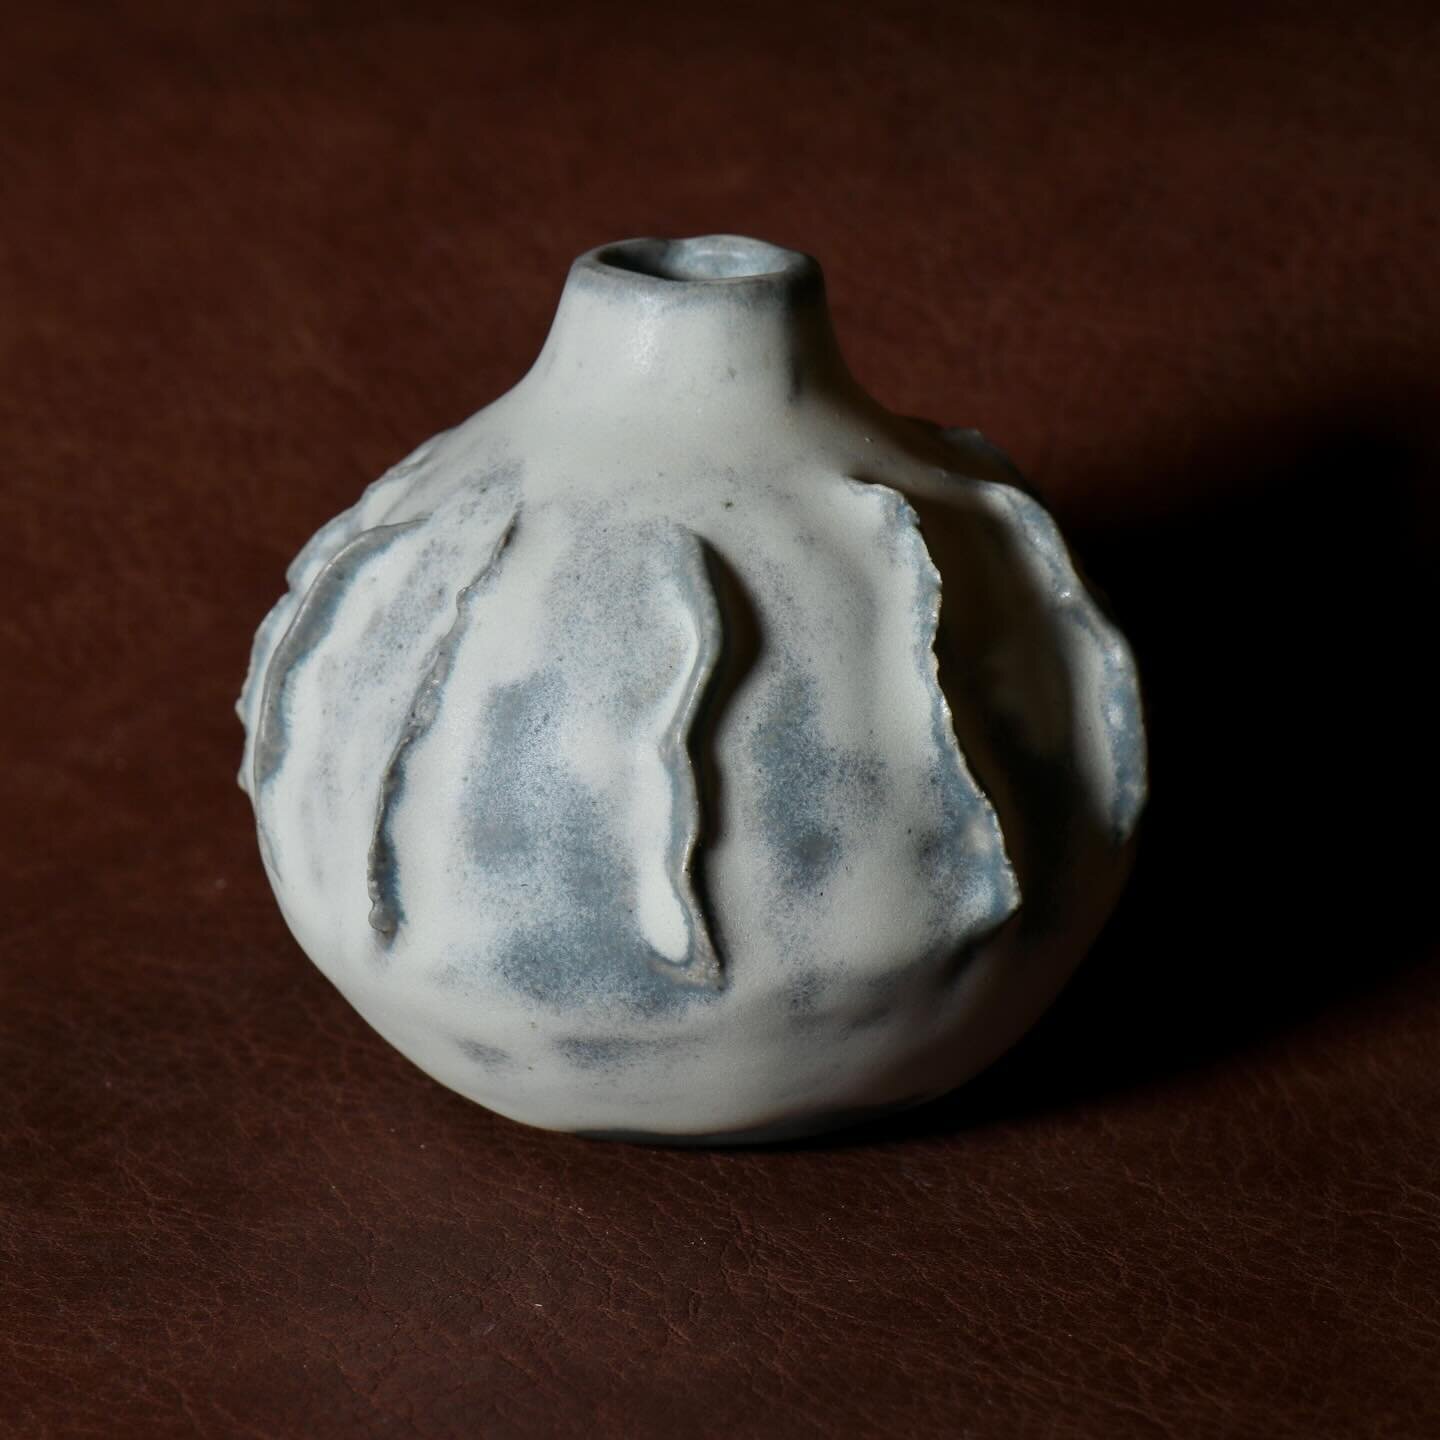 A ceramic diffuser inspired by the ocean. Can also be used as a round-belly vase.

Hand built and brush glazed.
Stoneware. Fired to Cone 6.
.

#potterystudio #potterylife #instapottery #potteryofinstagram  #potteryartist #potteryart #potterymaking 
#